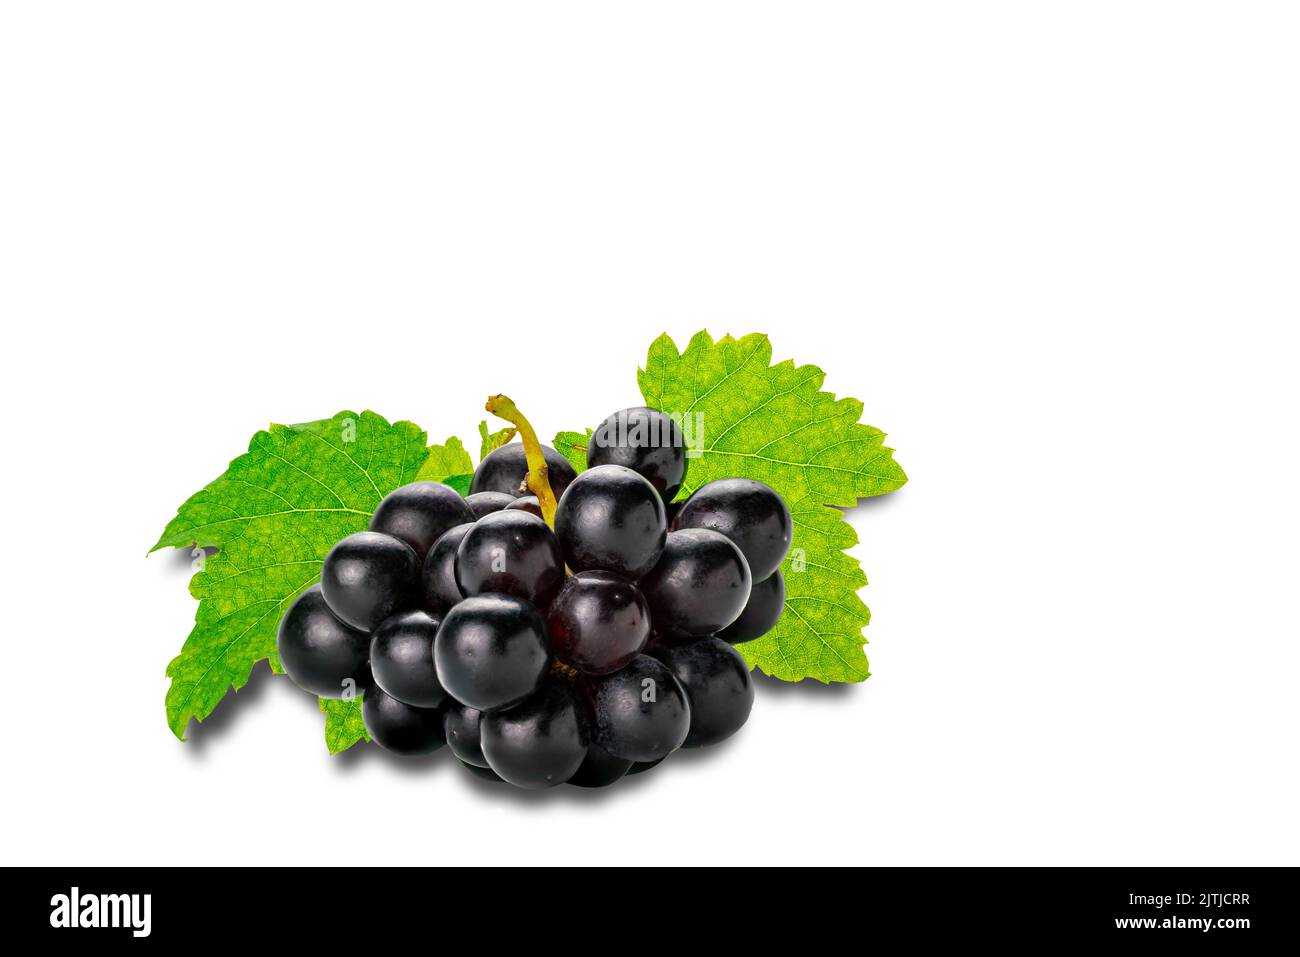 Bunch of black ripe grapes with green leaves isolated on white background with clipping path. Stock Photo